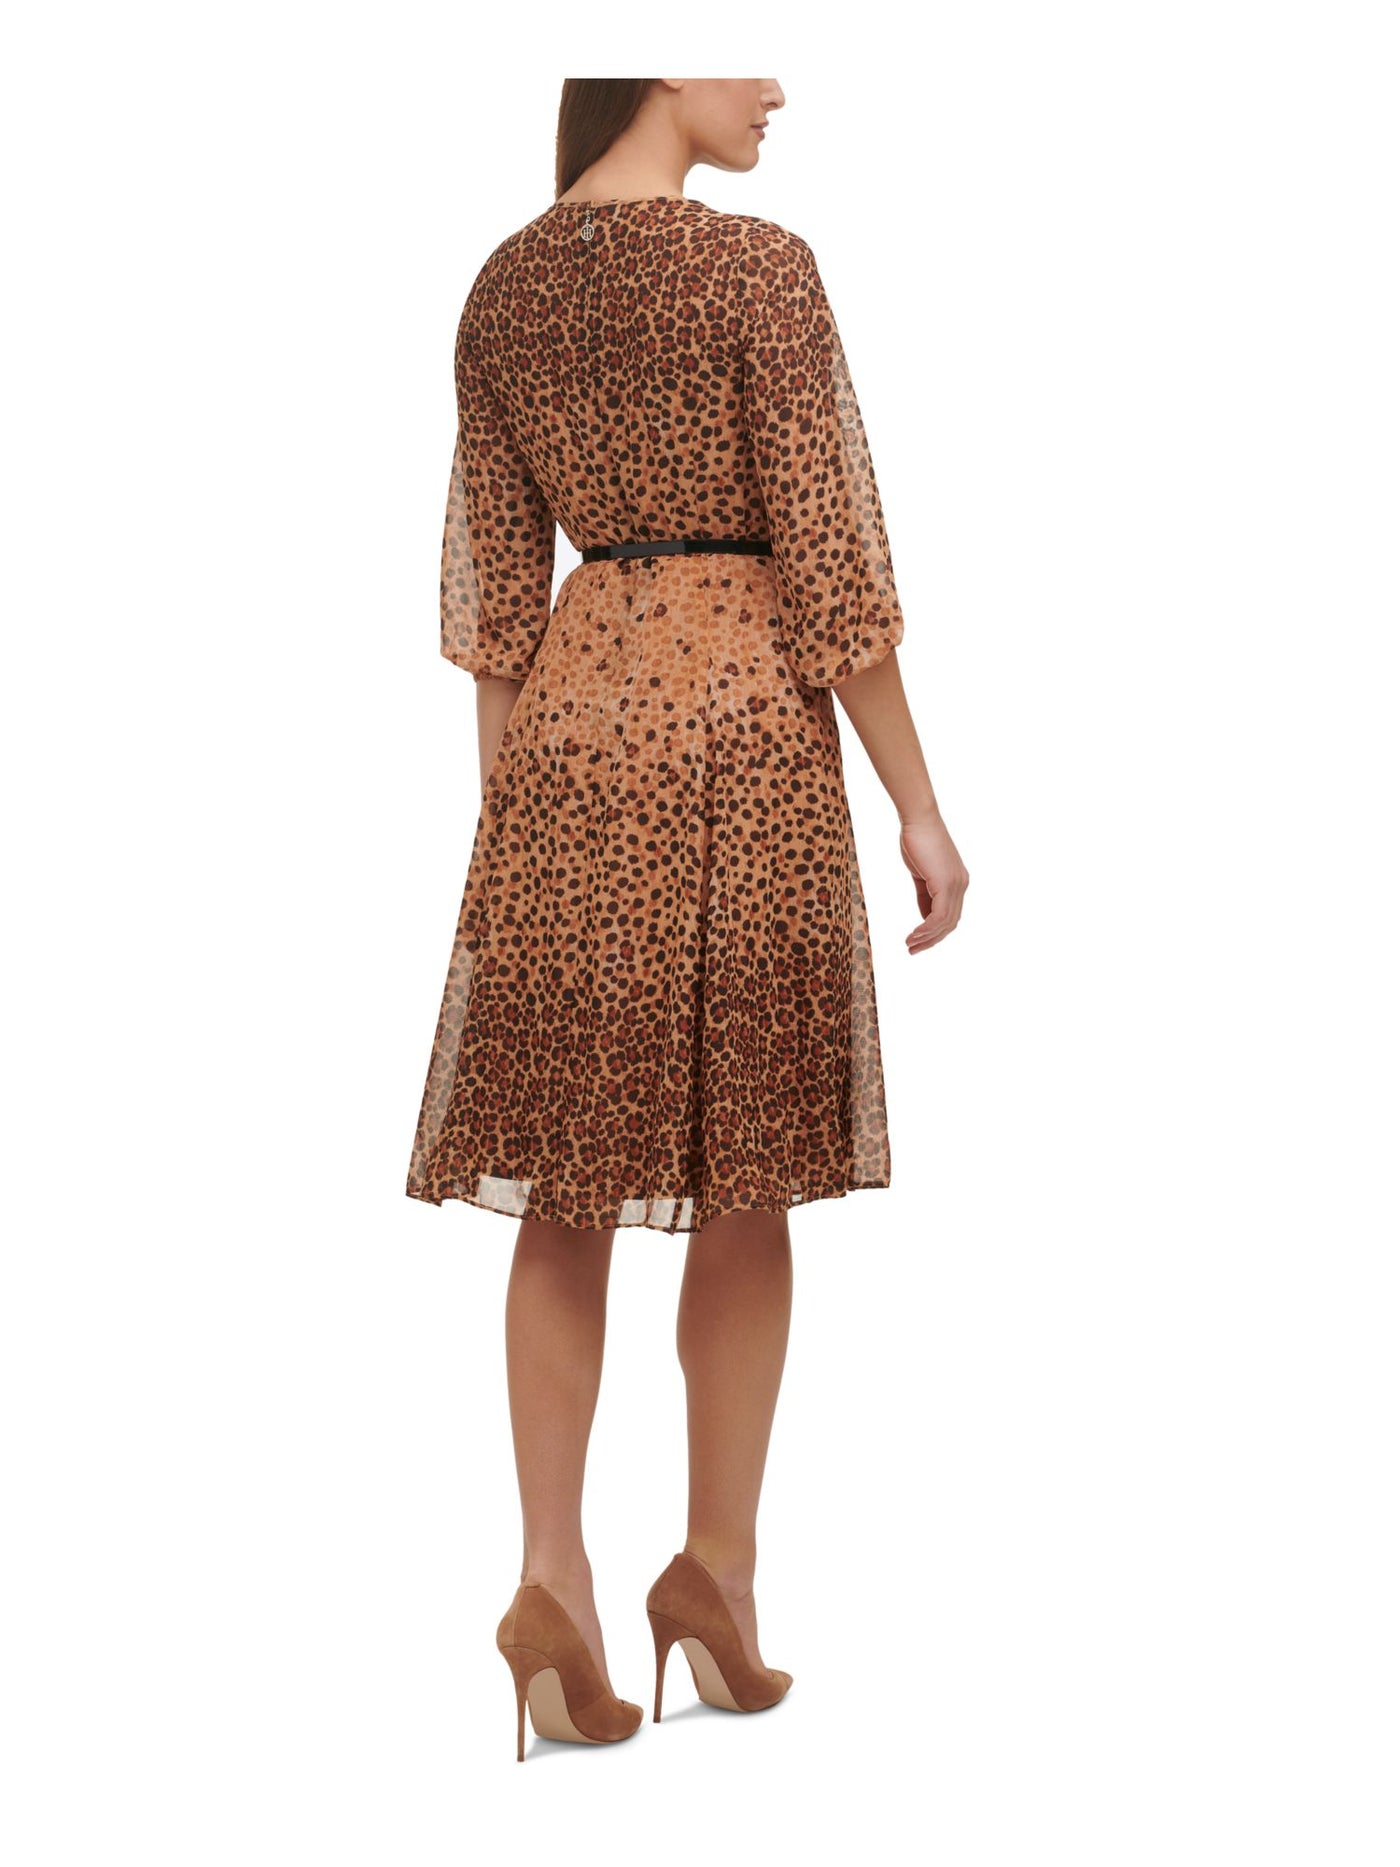 TOMMY HILFIGER Womens Brown Zippered Belted Sheer Lined Animal Print Balloon Sleeve Tie Neck Above The Knee Wear To Work Fit + Flare Dress 2